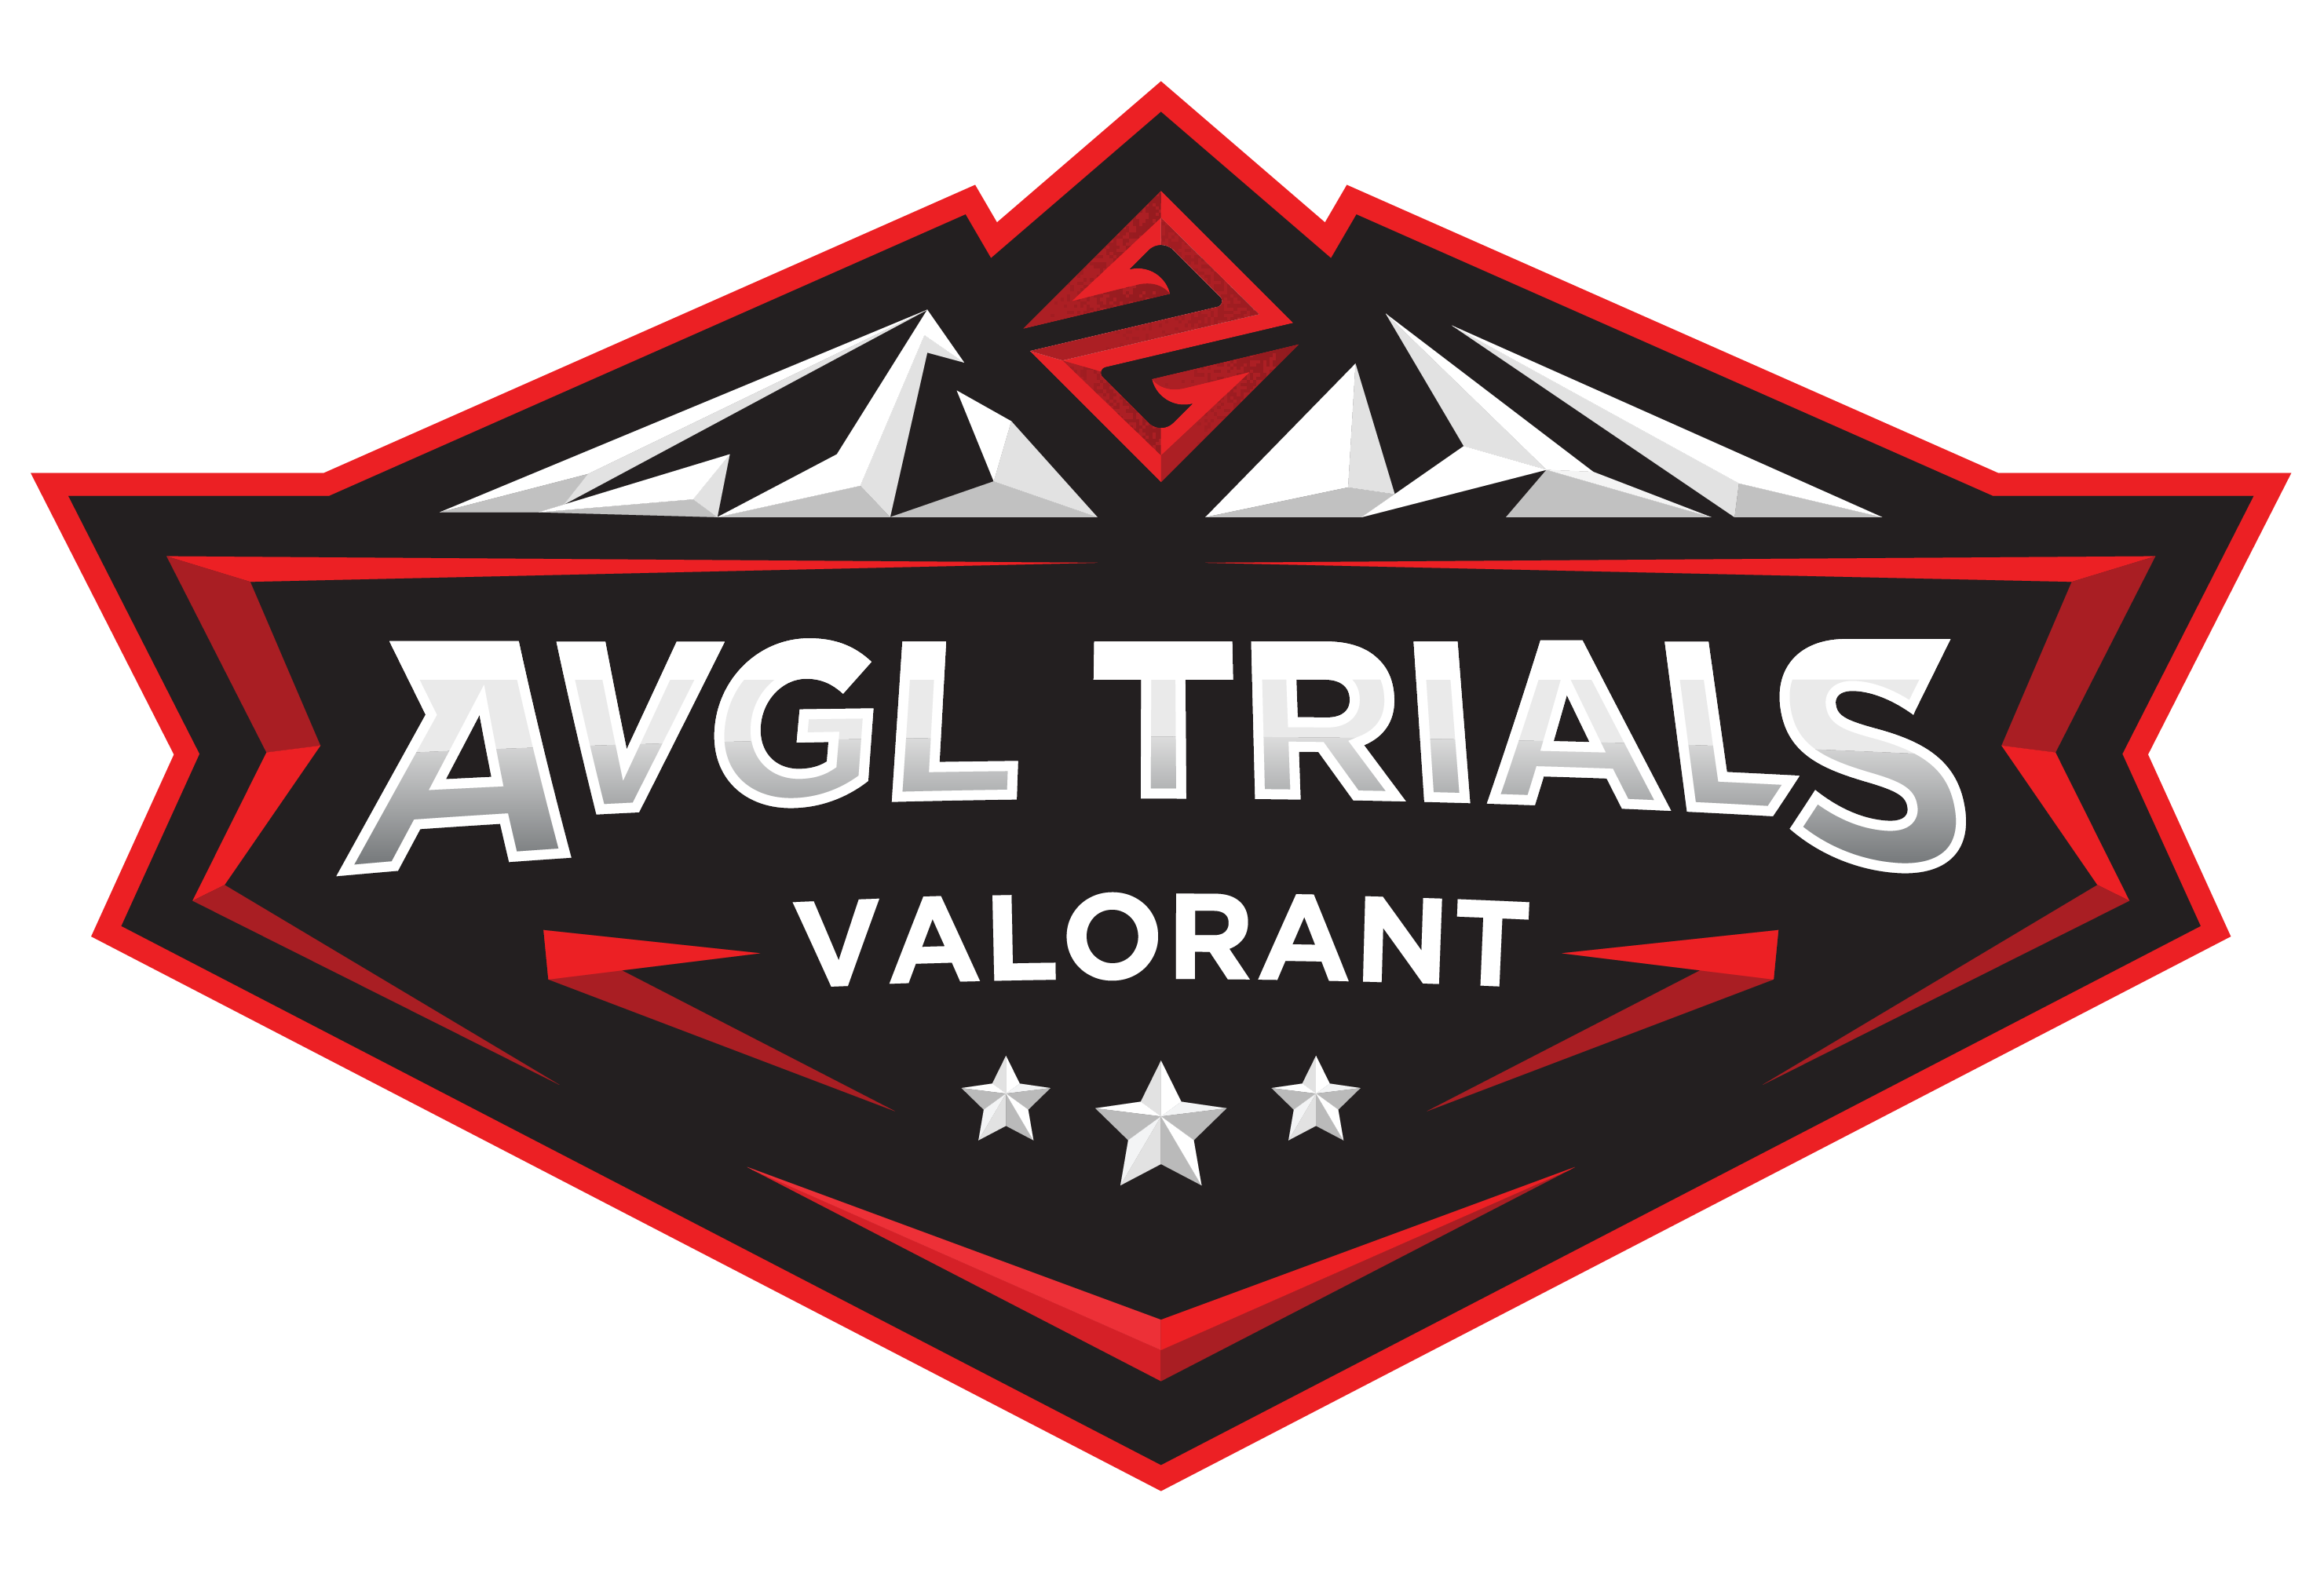 AVGL.org -AVGL Trials: Valorant presented by Esport Certified